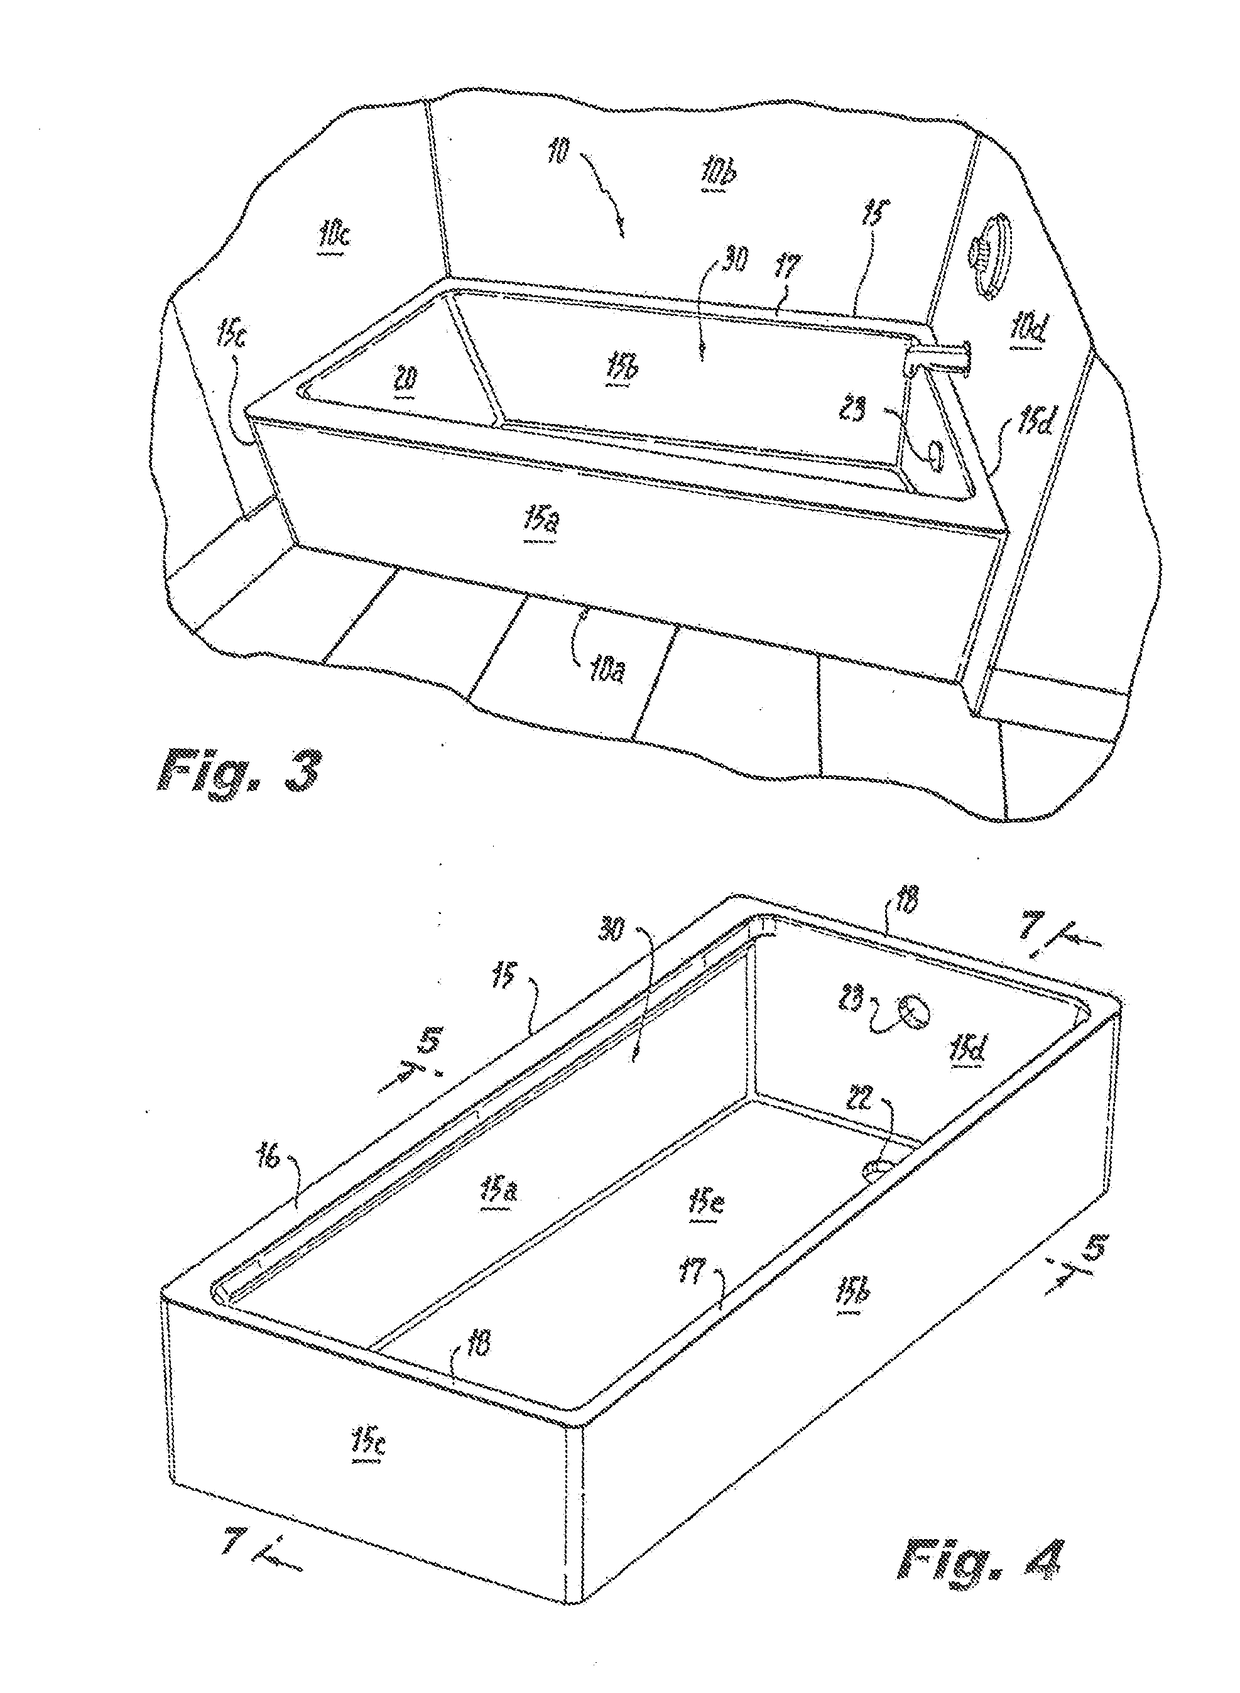 Bathtub fitting standard external space while affording safe egress and larger floor area with enclosed volume